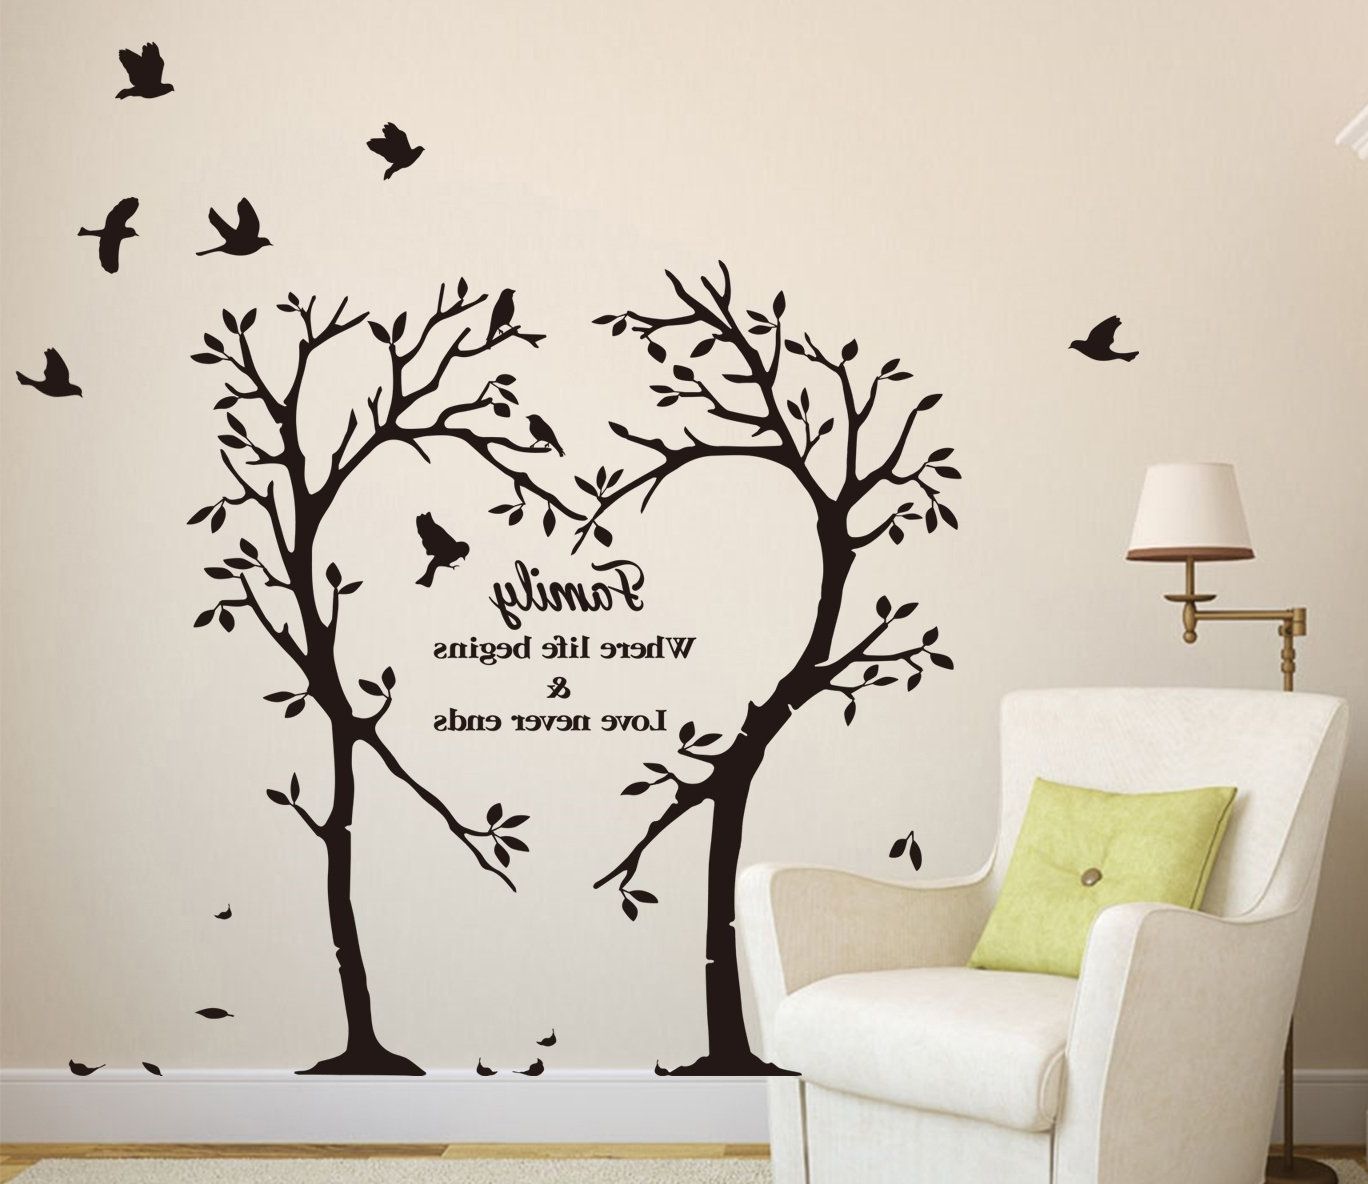 Well Known Wall Tree Art Pertaining To Large Family Inspirational Love Tree Wall Art Sticker, Wall Sticker (View 7 of 20)